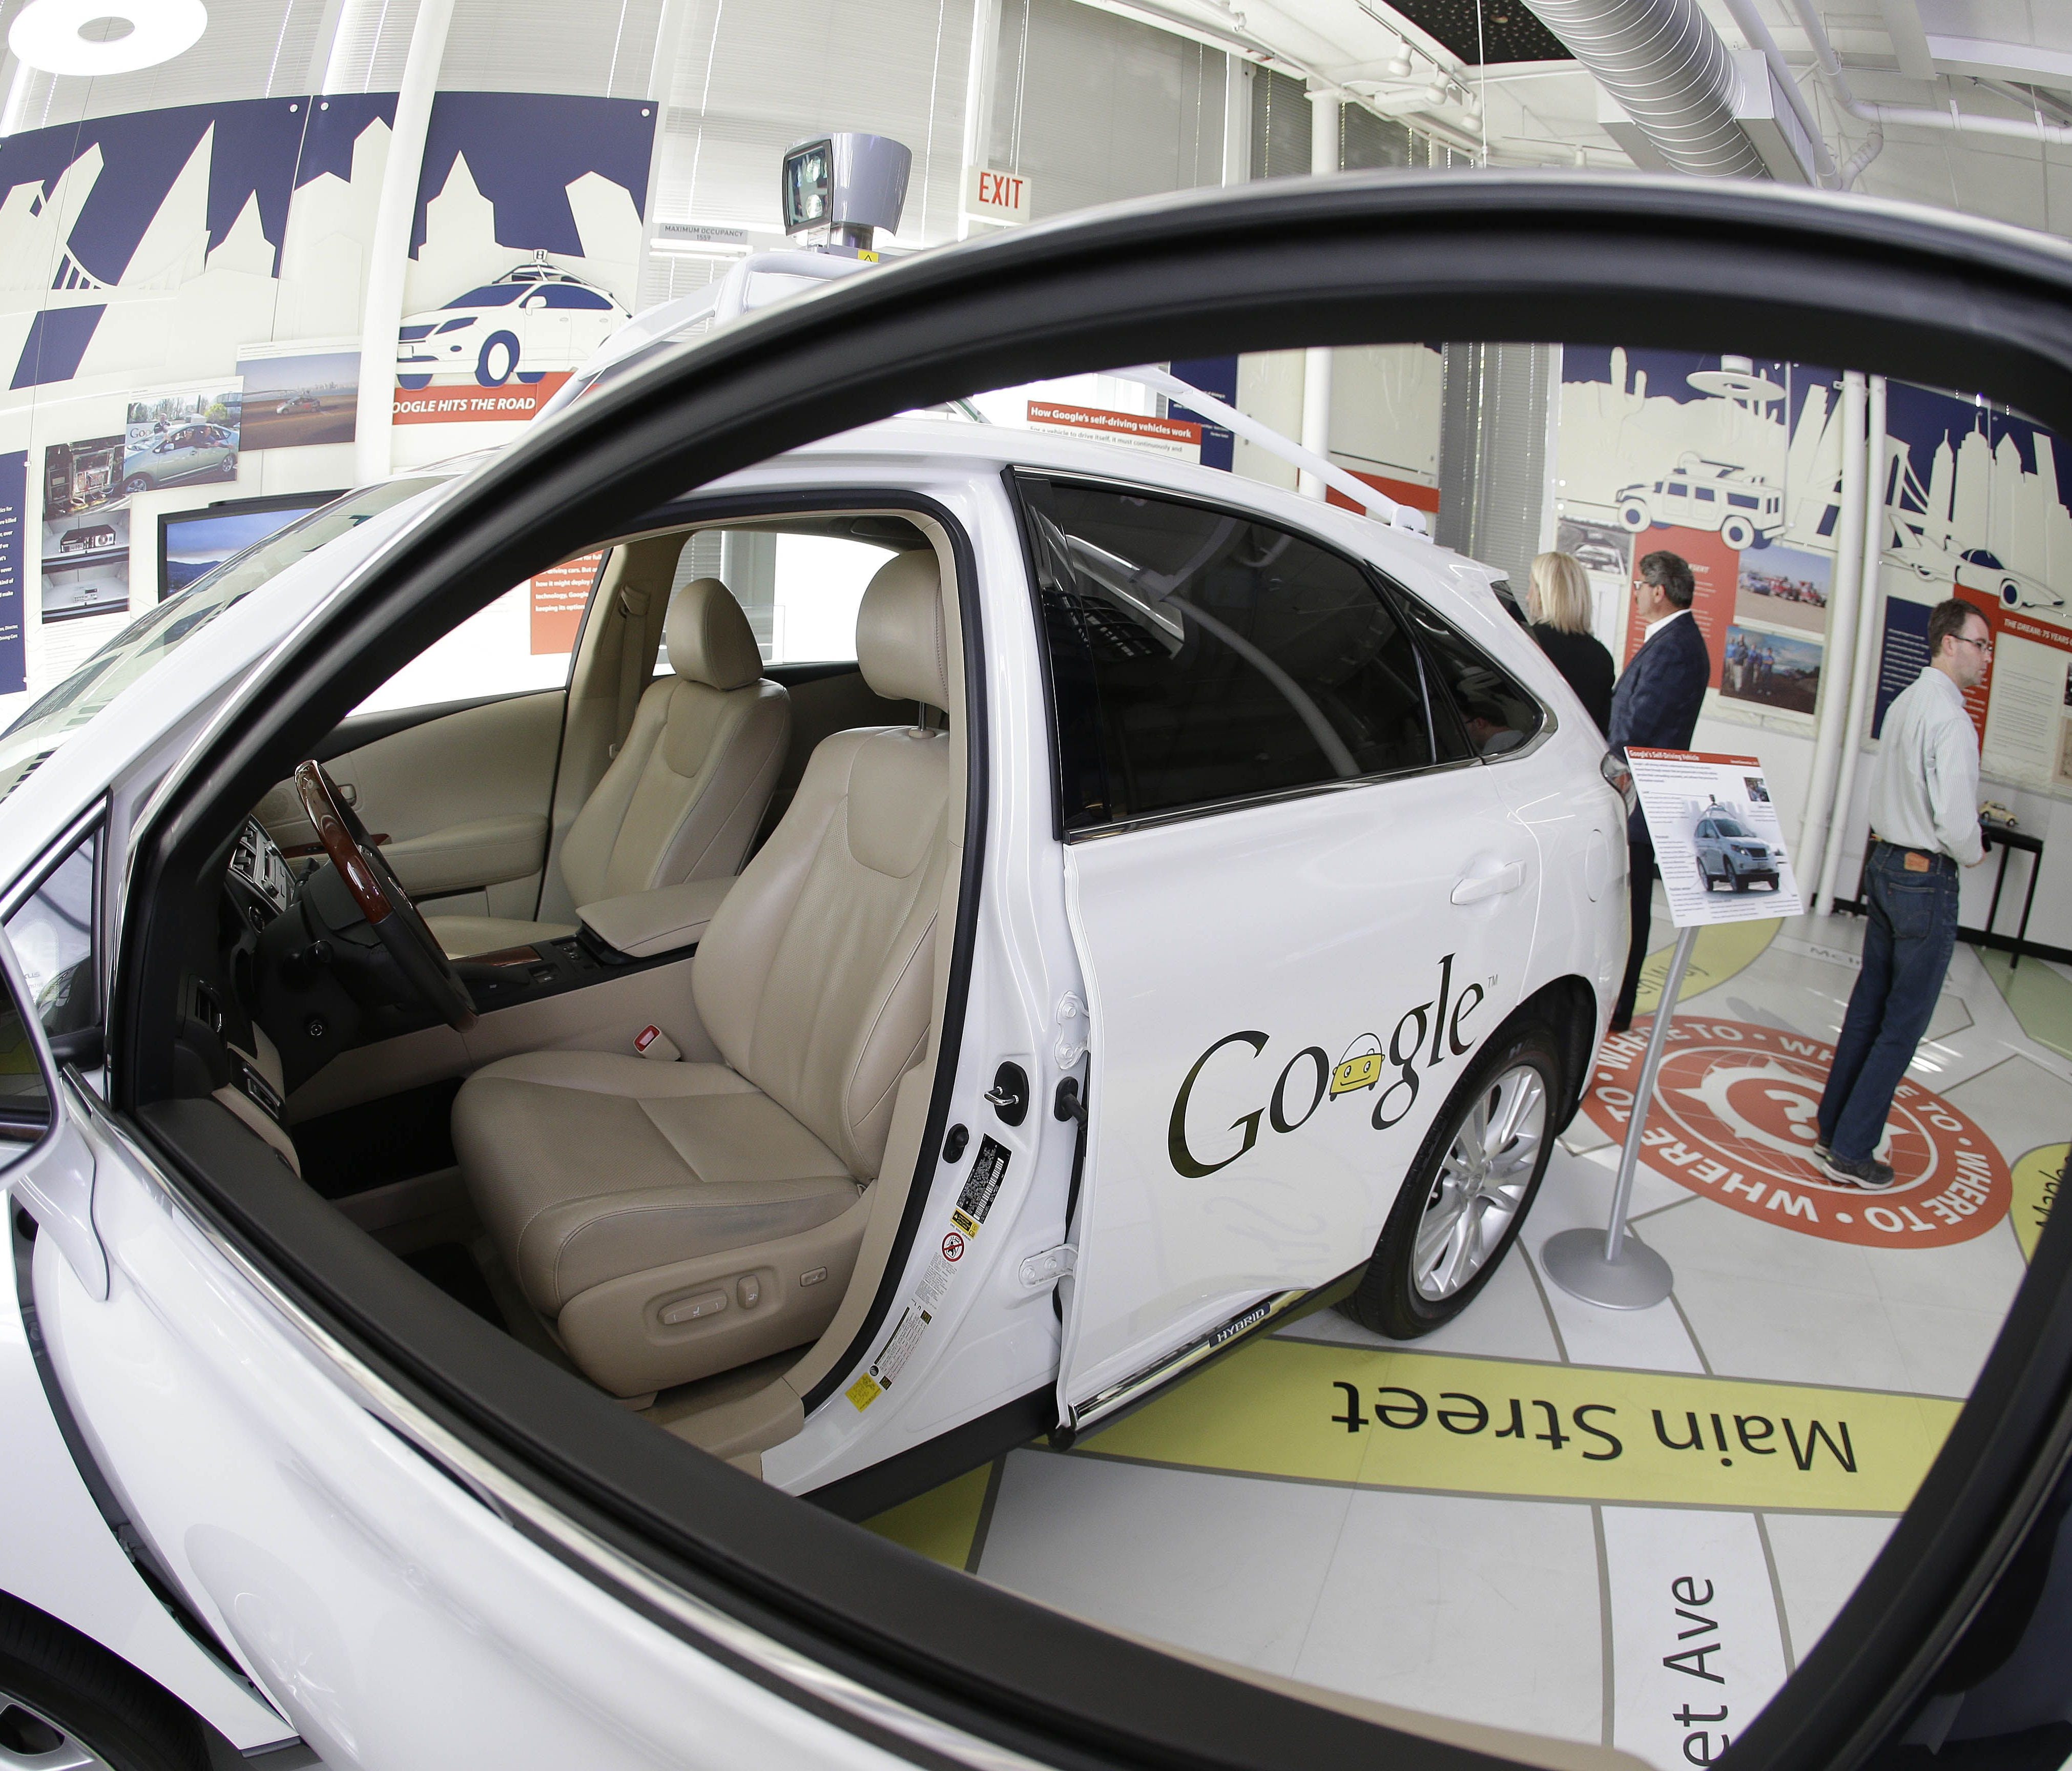 A Google self-driving car is shown in an exhibit at the Computer History Museum in Mountain View, Calif., in 2014